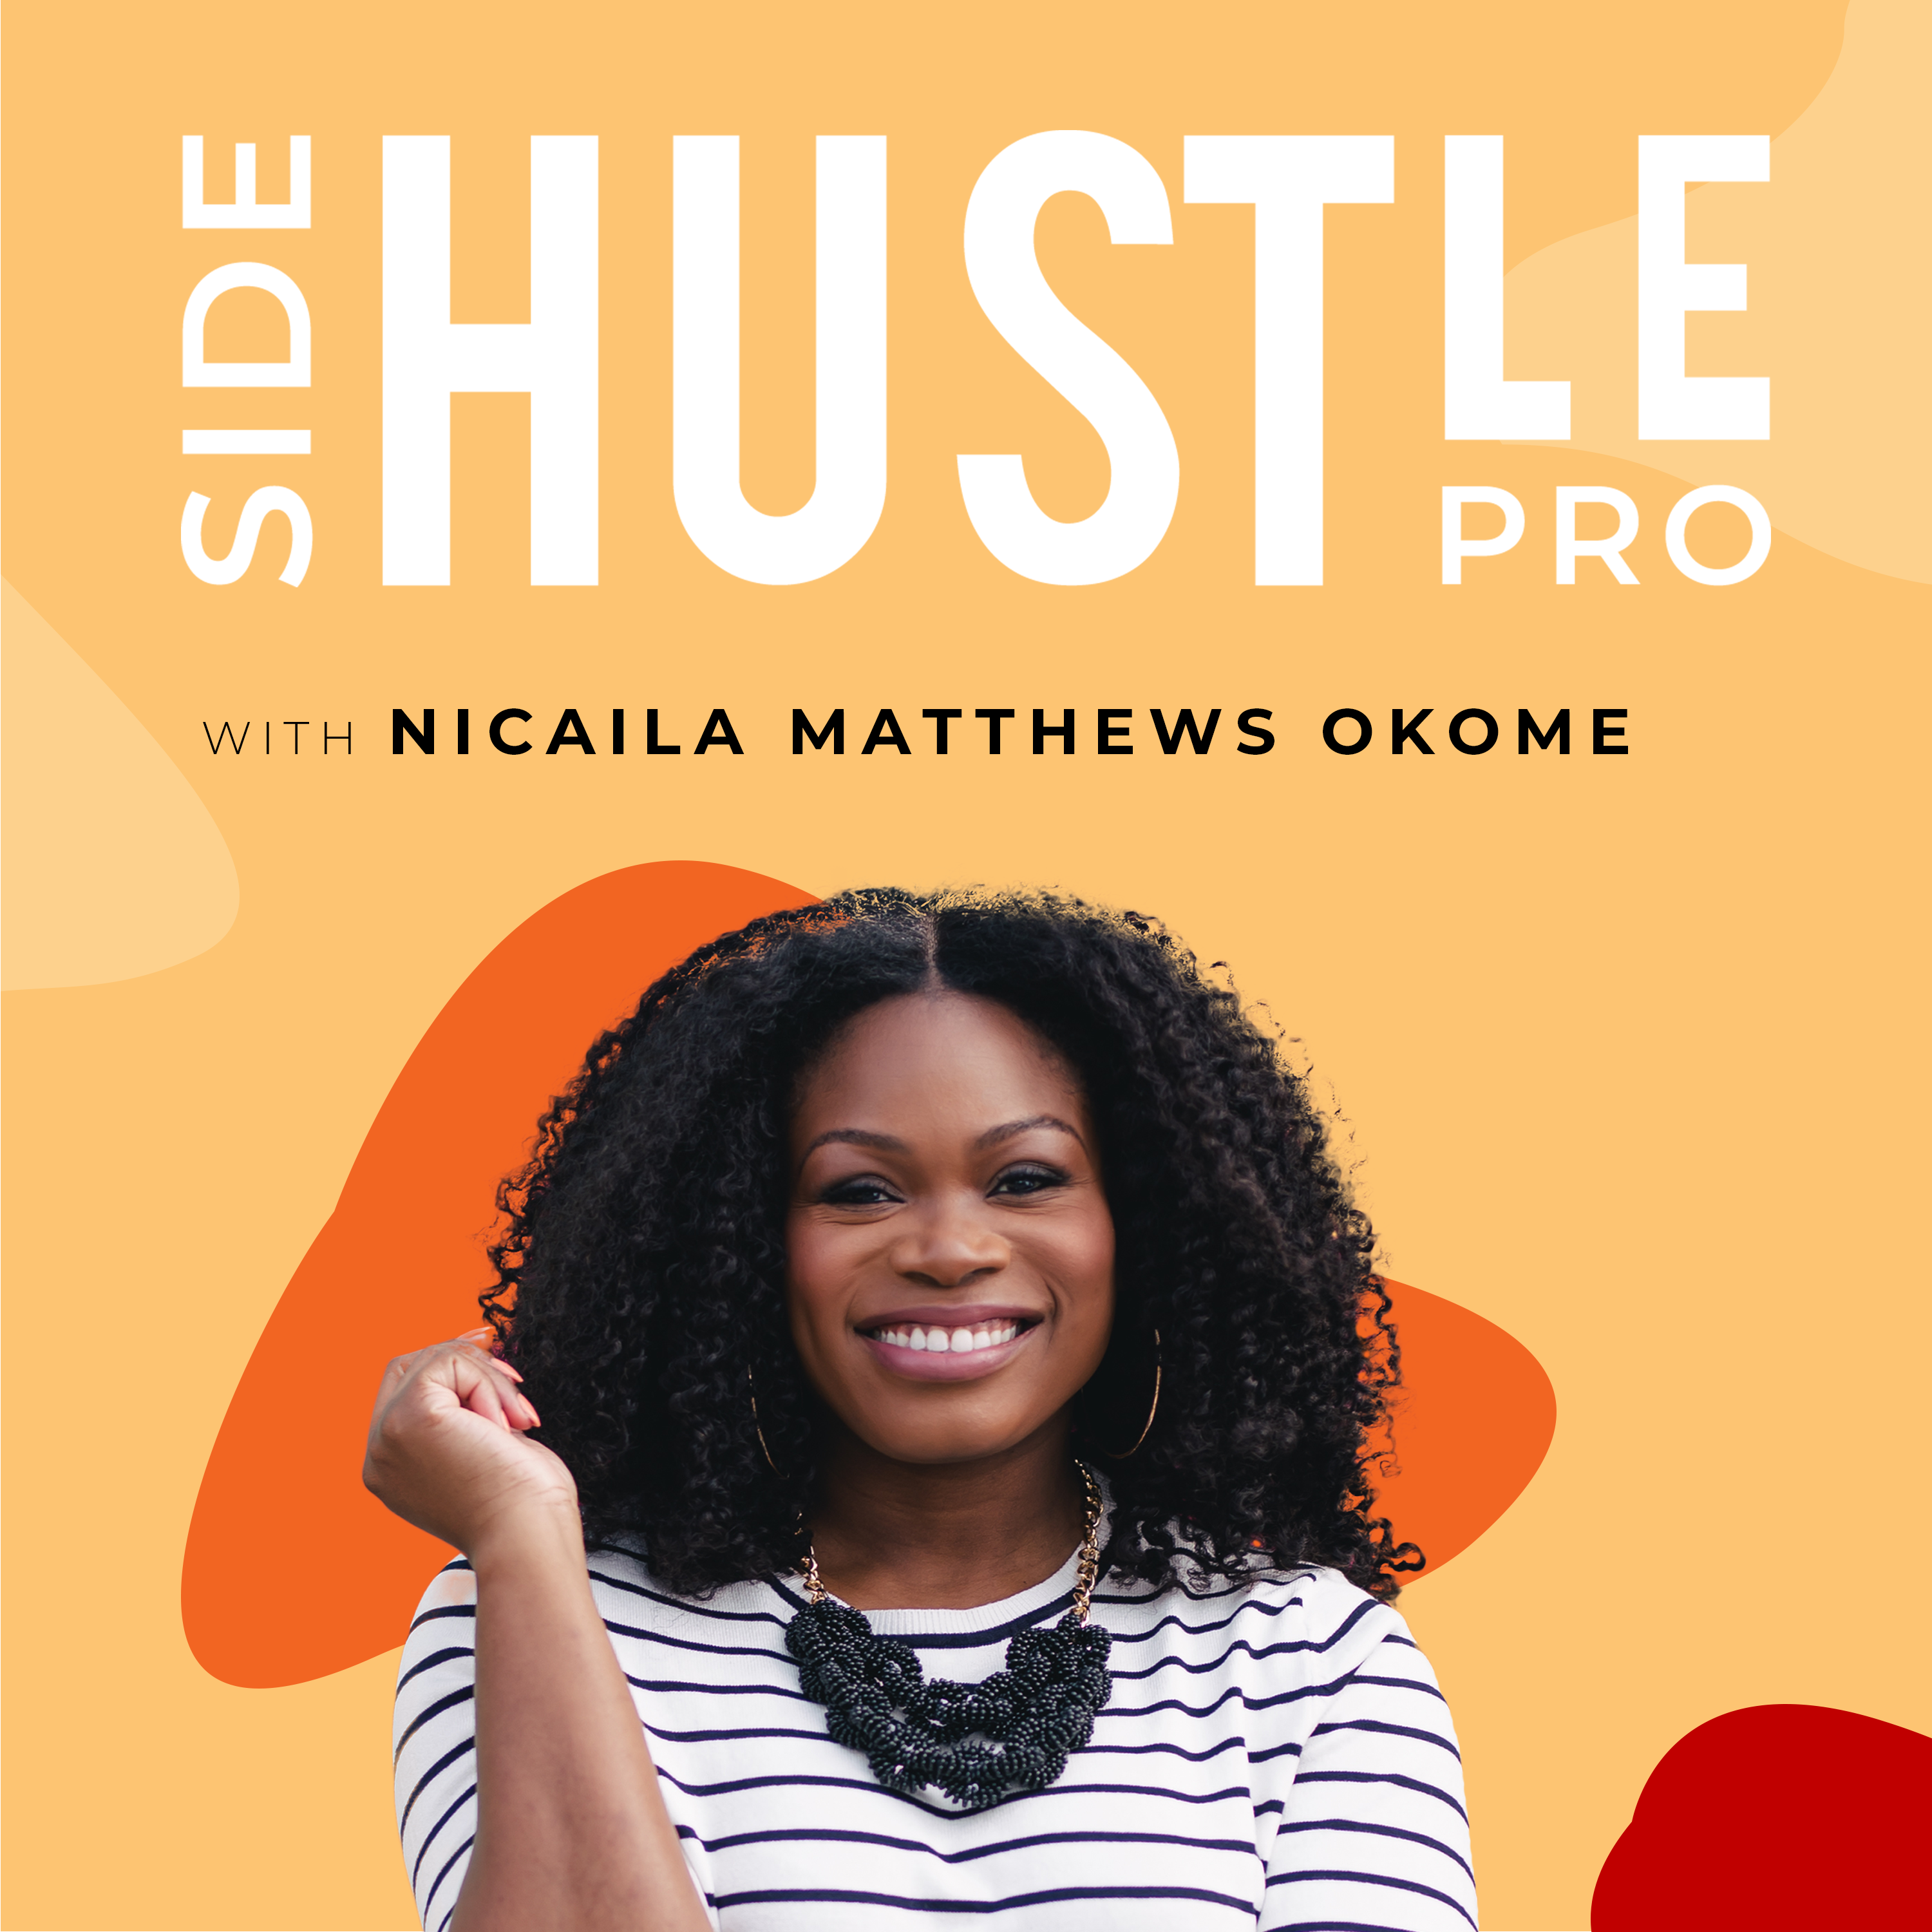 320: How Career Coach Angelina Darrisaw Went From Side Hustler To CEO